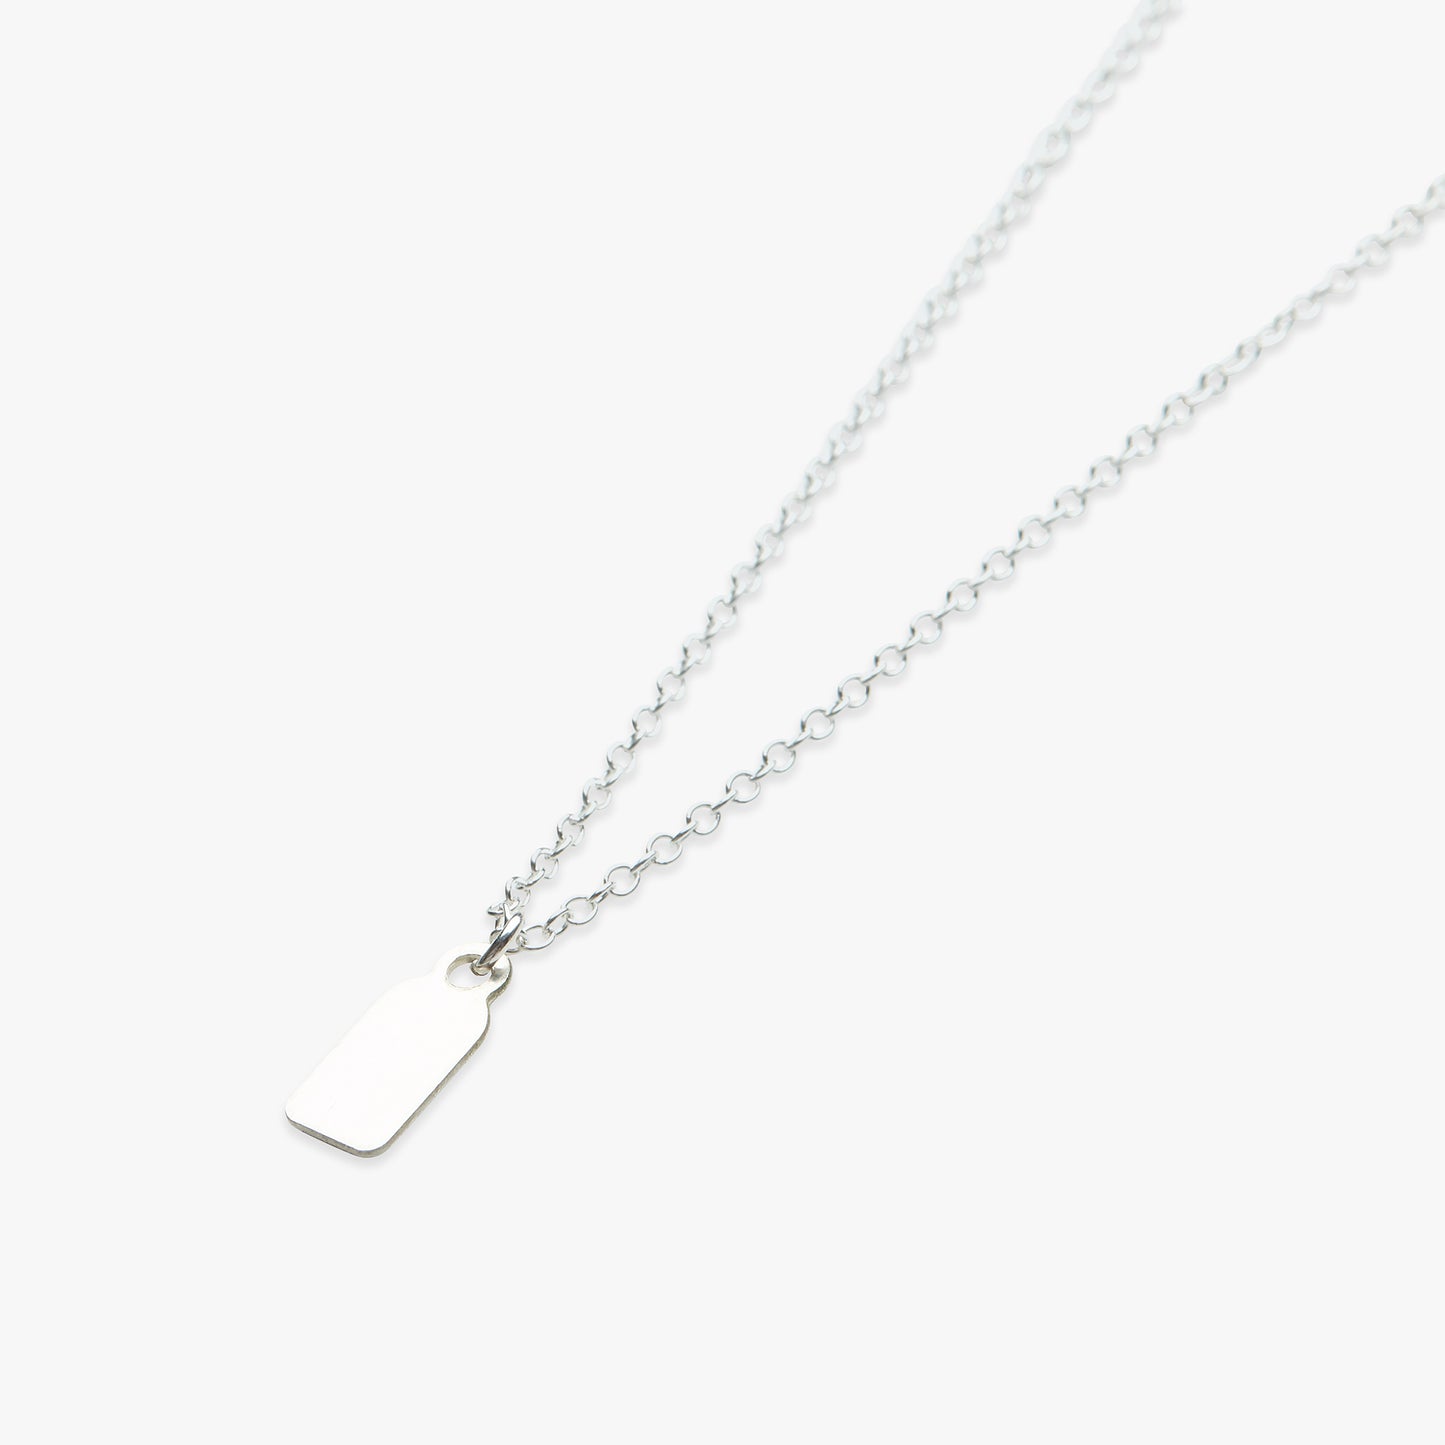 Label ketting zilver